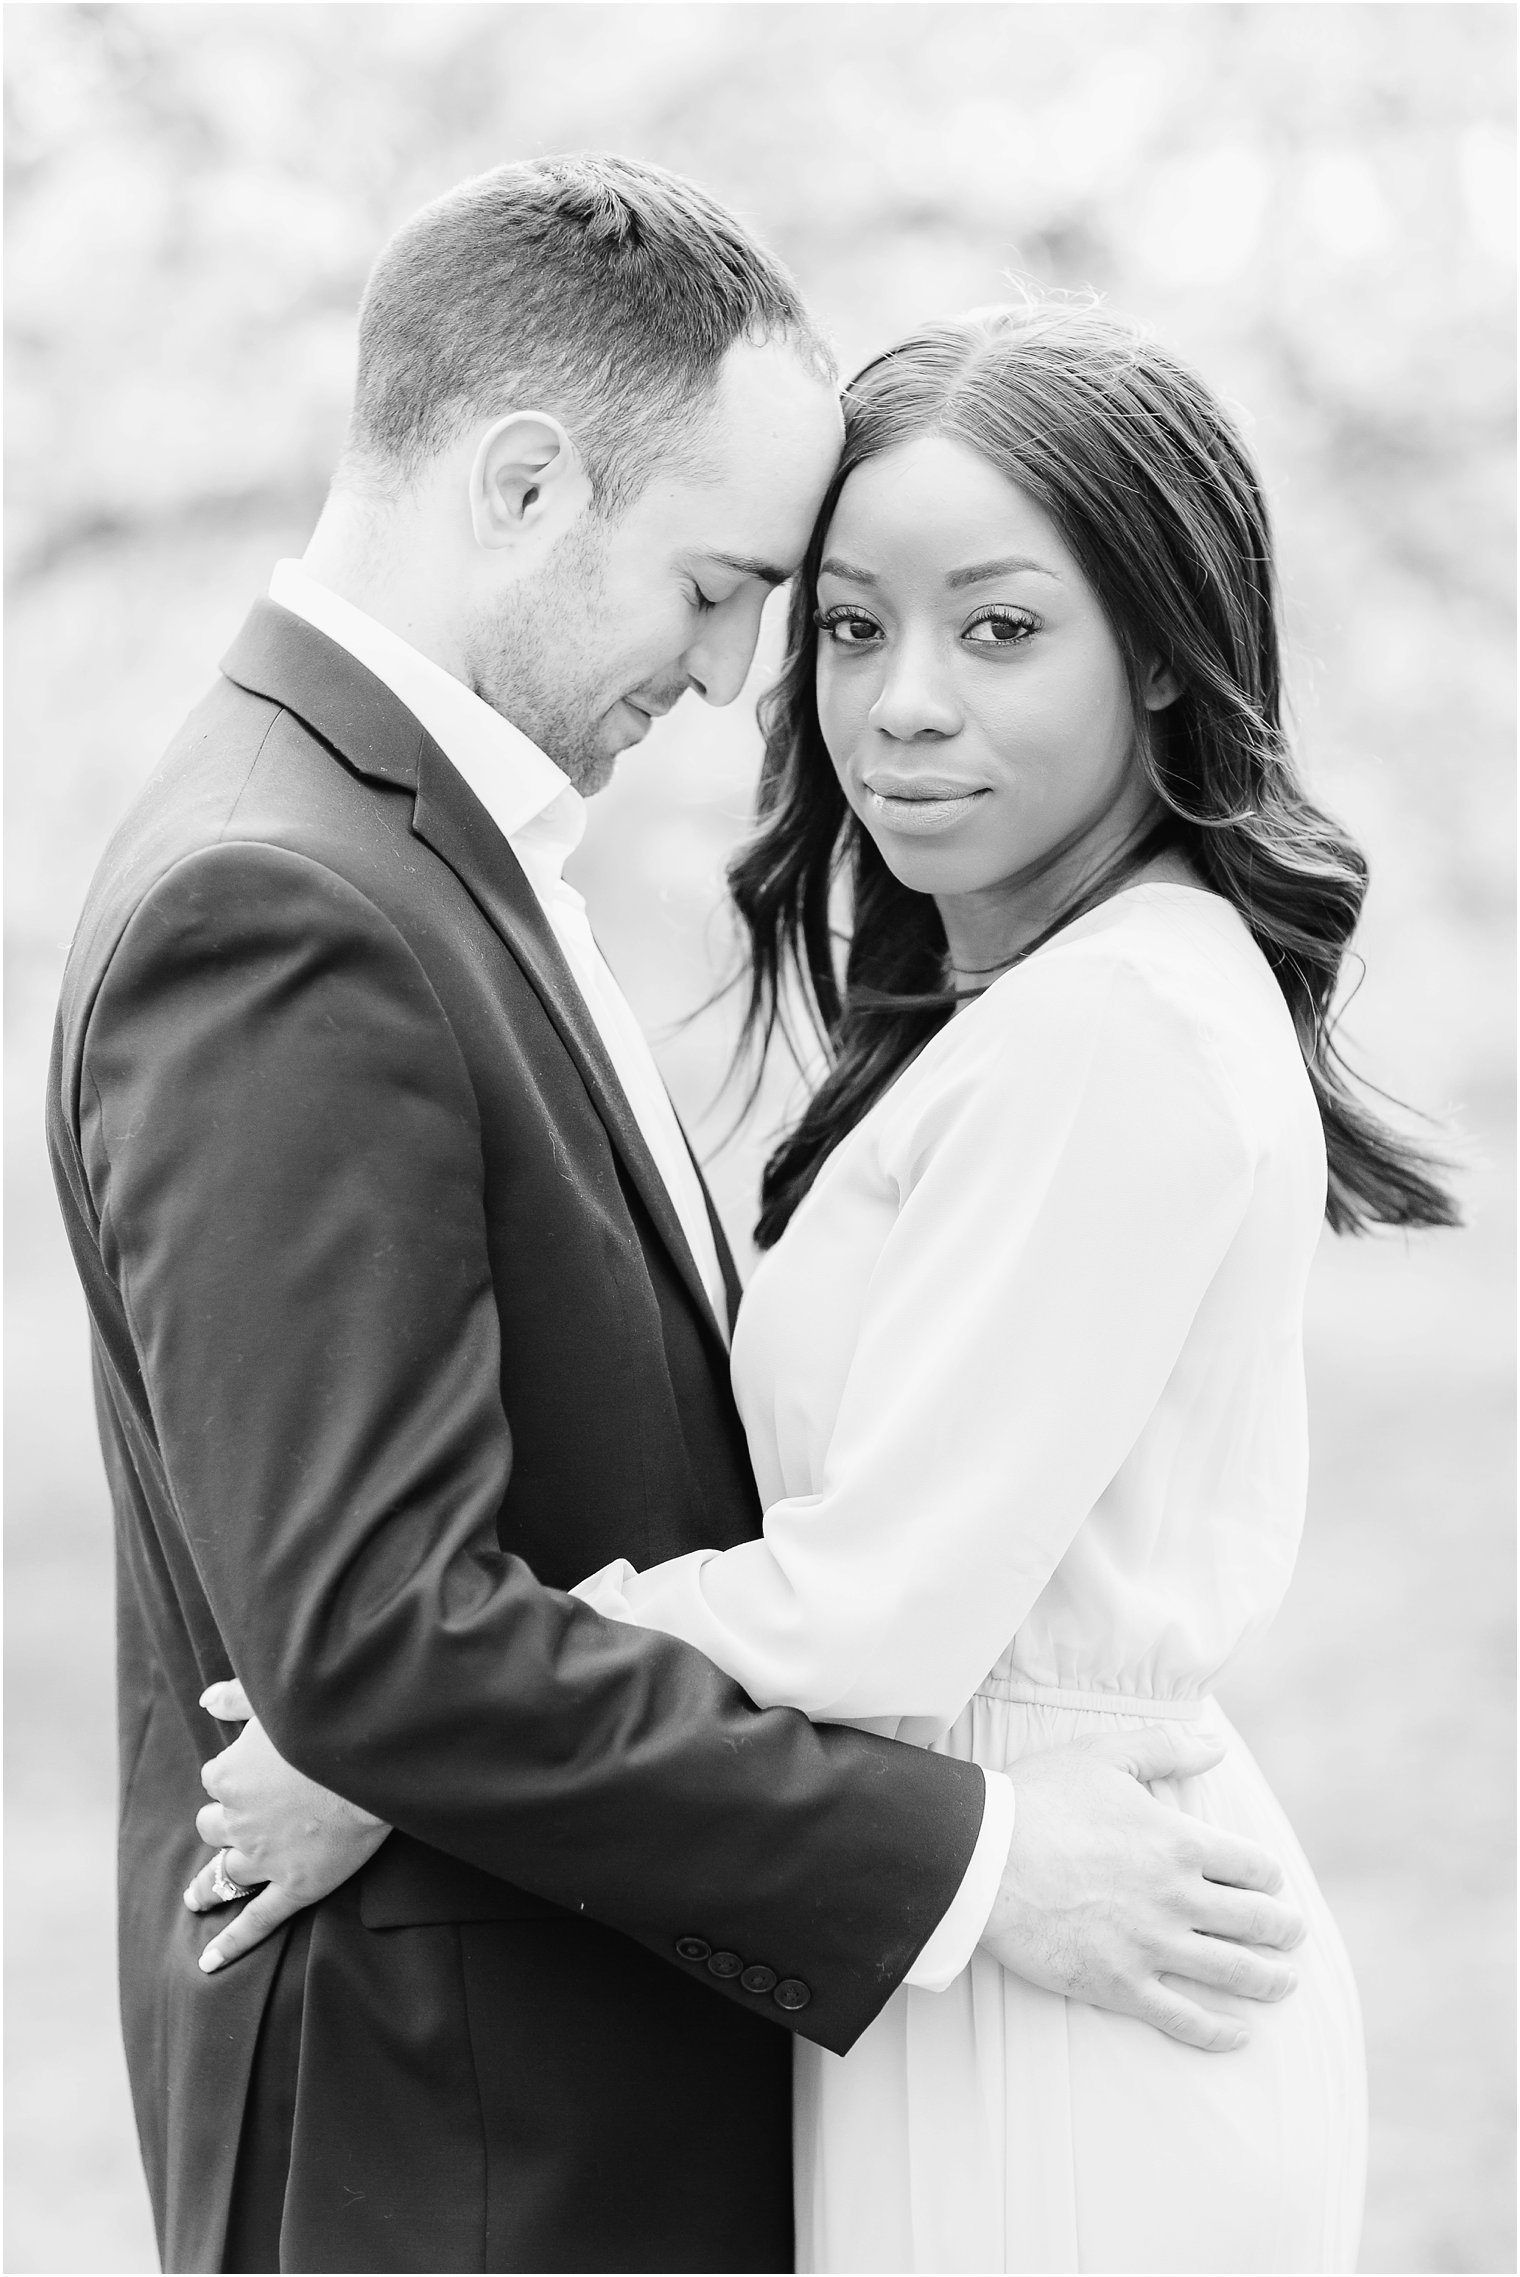 romantic engagement photo in black and white